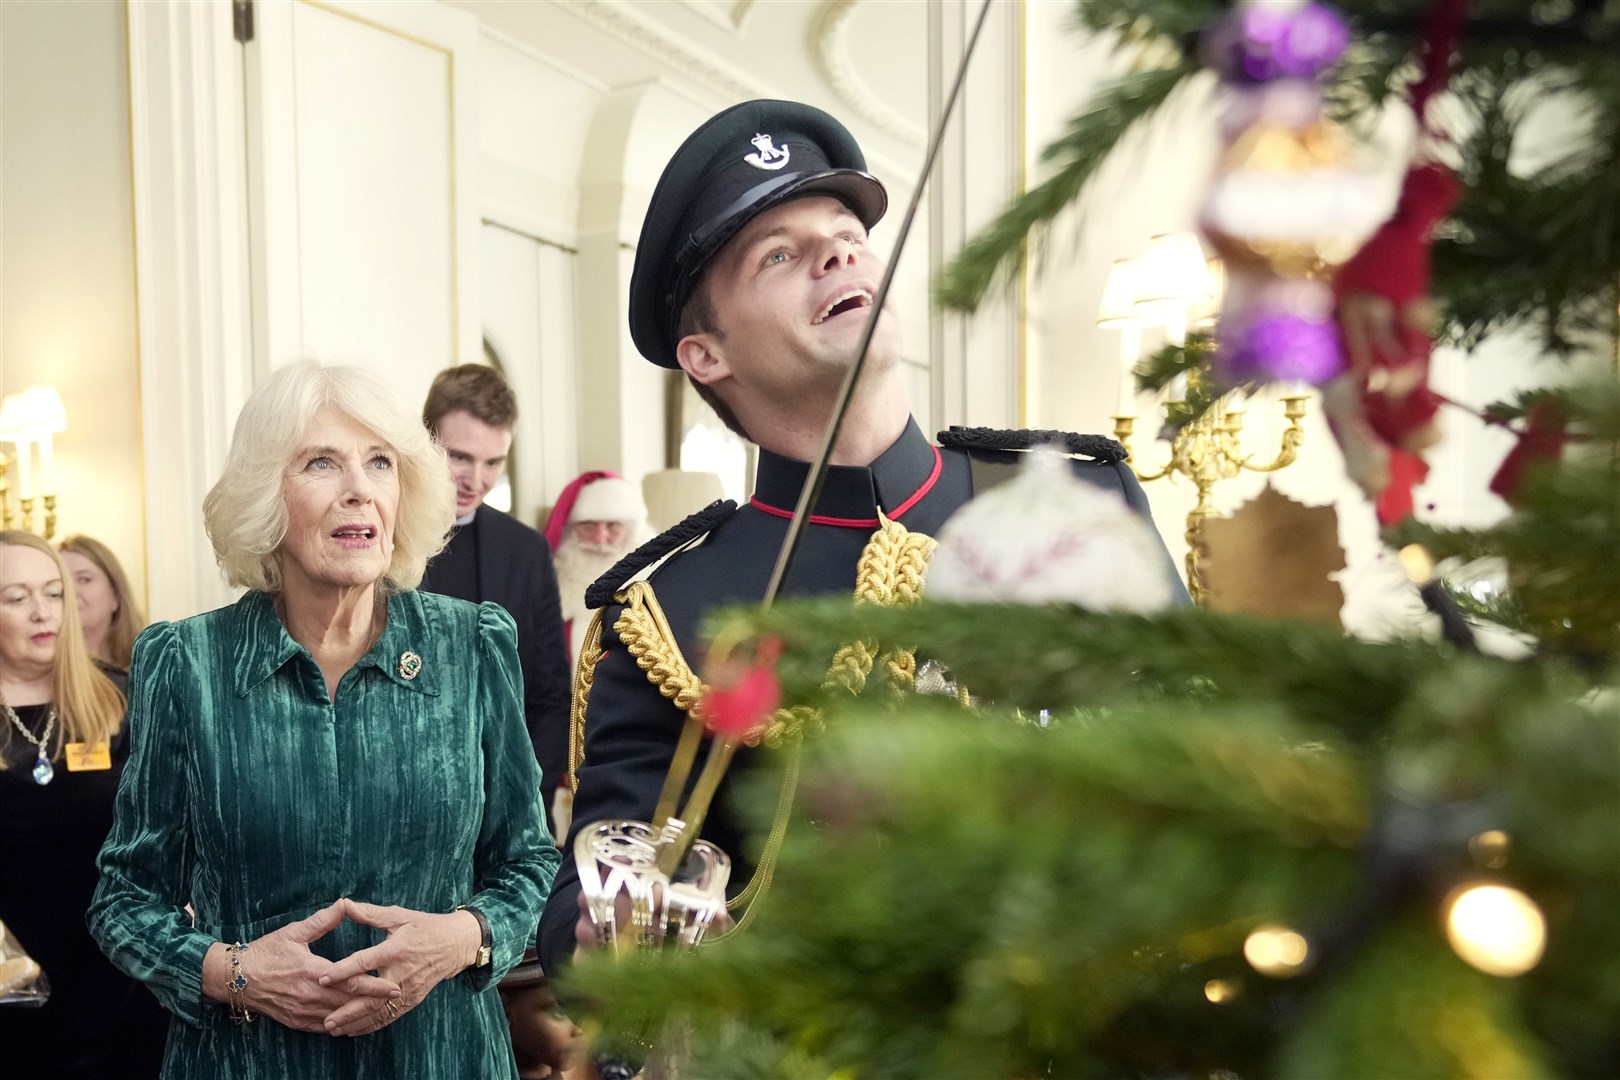 The Queen watches as her equerry places a decoration on the Christmas tree with his sabre (Kin Cheung/PA)